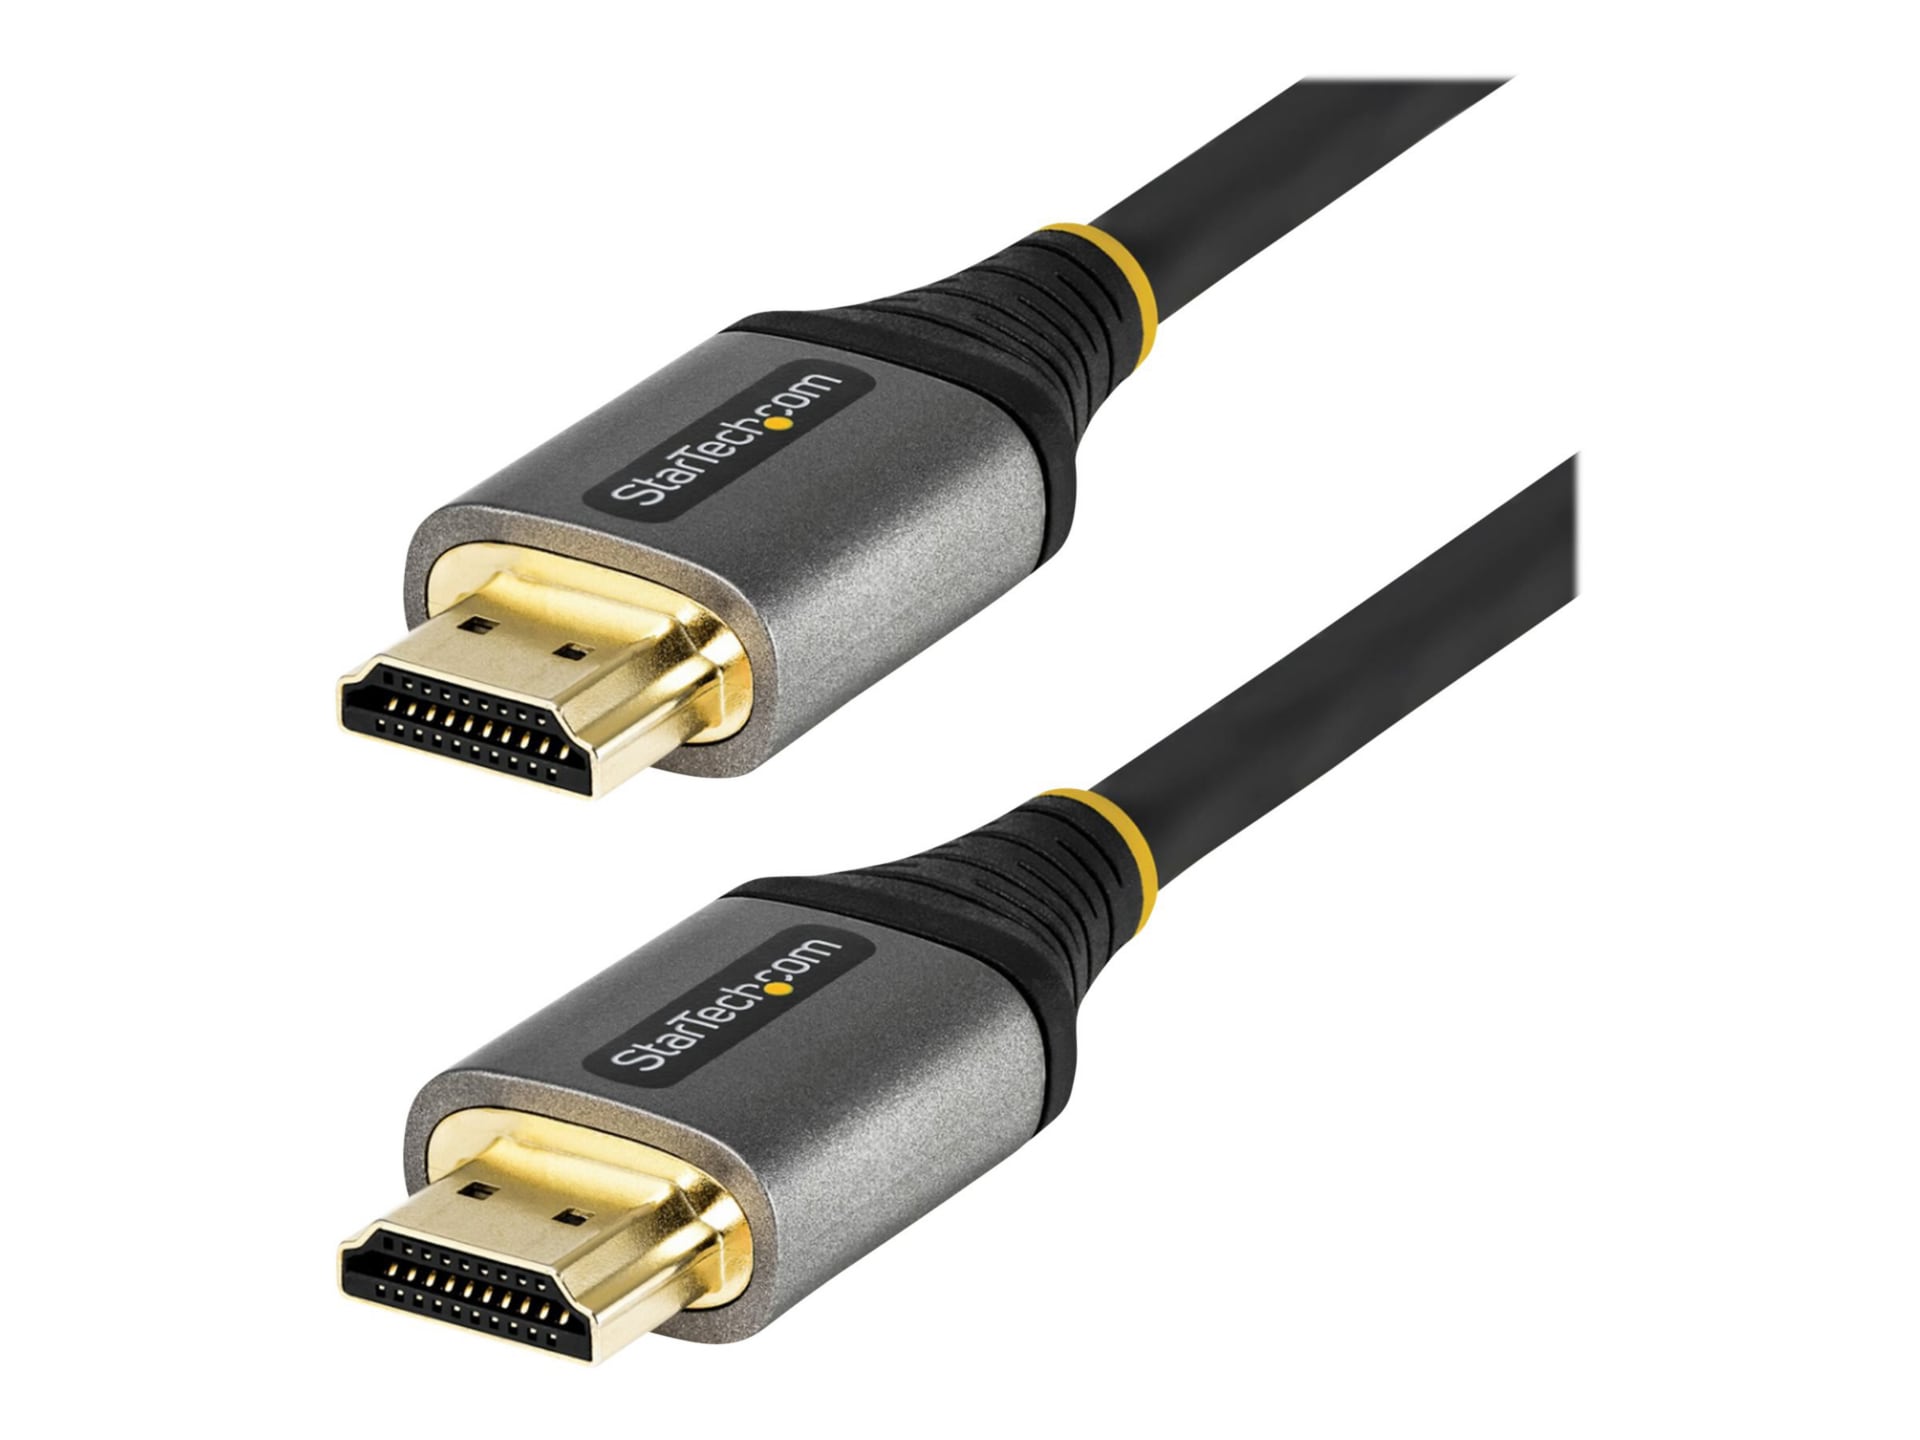 StarTech.com 13ft (4m) Premium Certified HDMI 2.0 Cable, High Speed Ultra HD 4K 60Hz HDMI Cable w/ Ethernet, HDR10, UHD